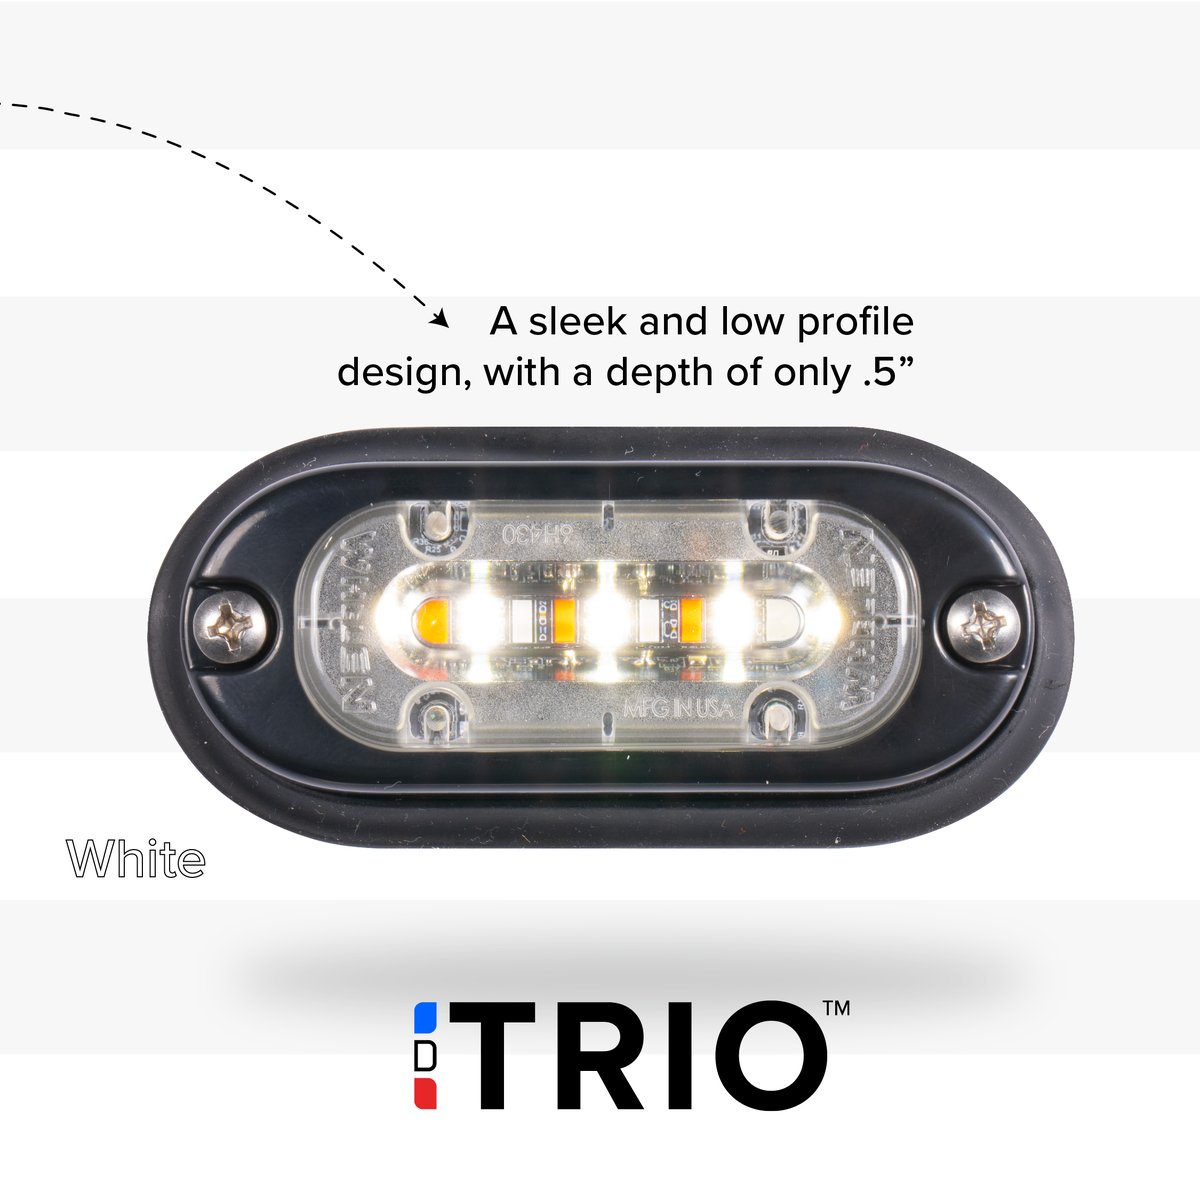 Mini T-Series™ is now available in TRIO™! 

Ideal for high-performance warning or illumination, the Mini-T Series features a sleek, low-profile design with a depth of only .5” allowing it to easily fit into tight spaces. 

#WhelenEng #ManufacturedinAmerica #EmergencyLighting